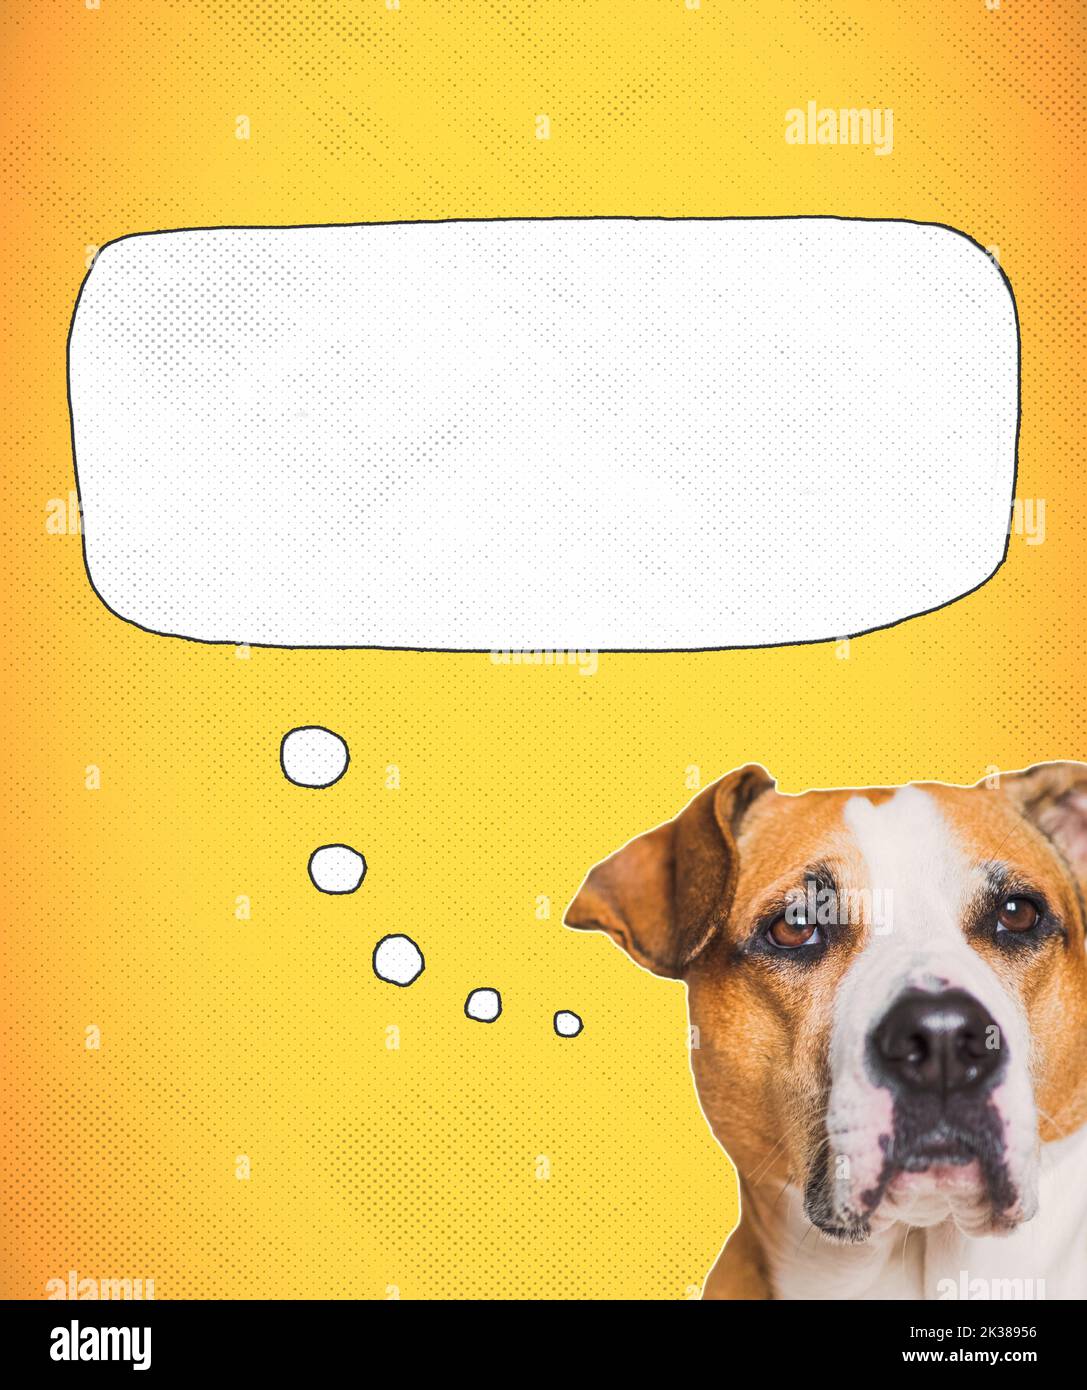 Funny dog thinking, speech bubble, digital collage image. Cute staffordshire terrier with a thought bubble and text space Stock Photo